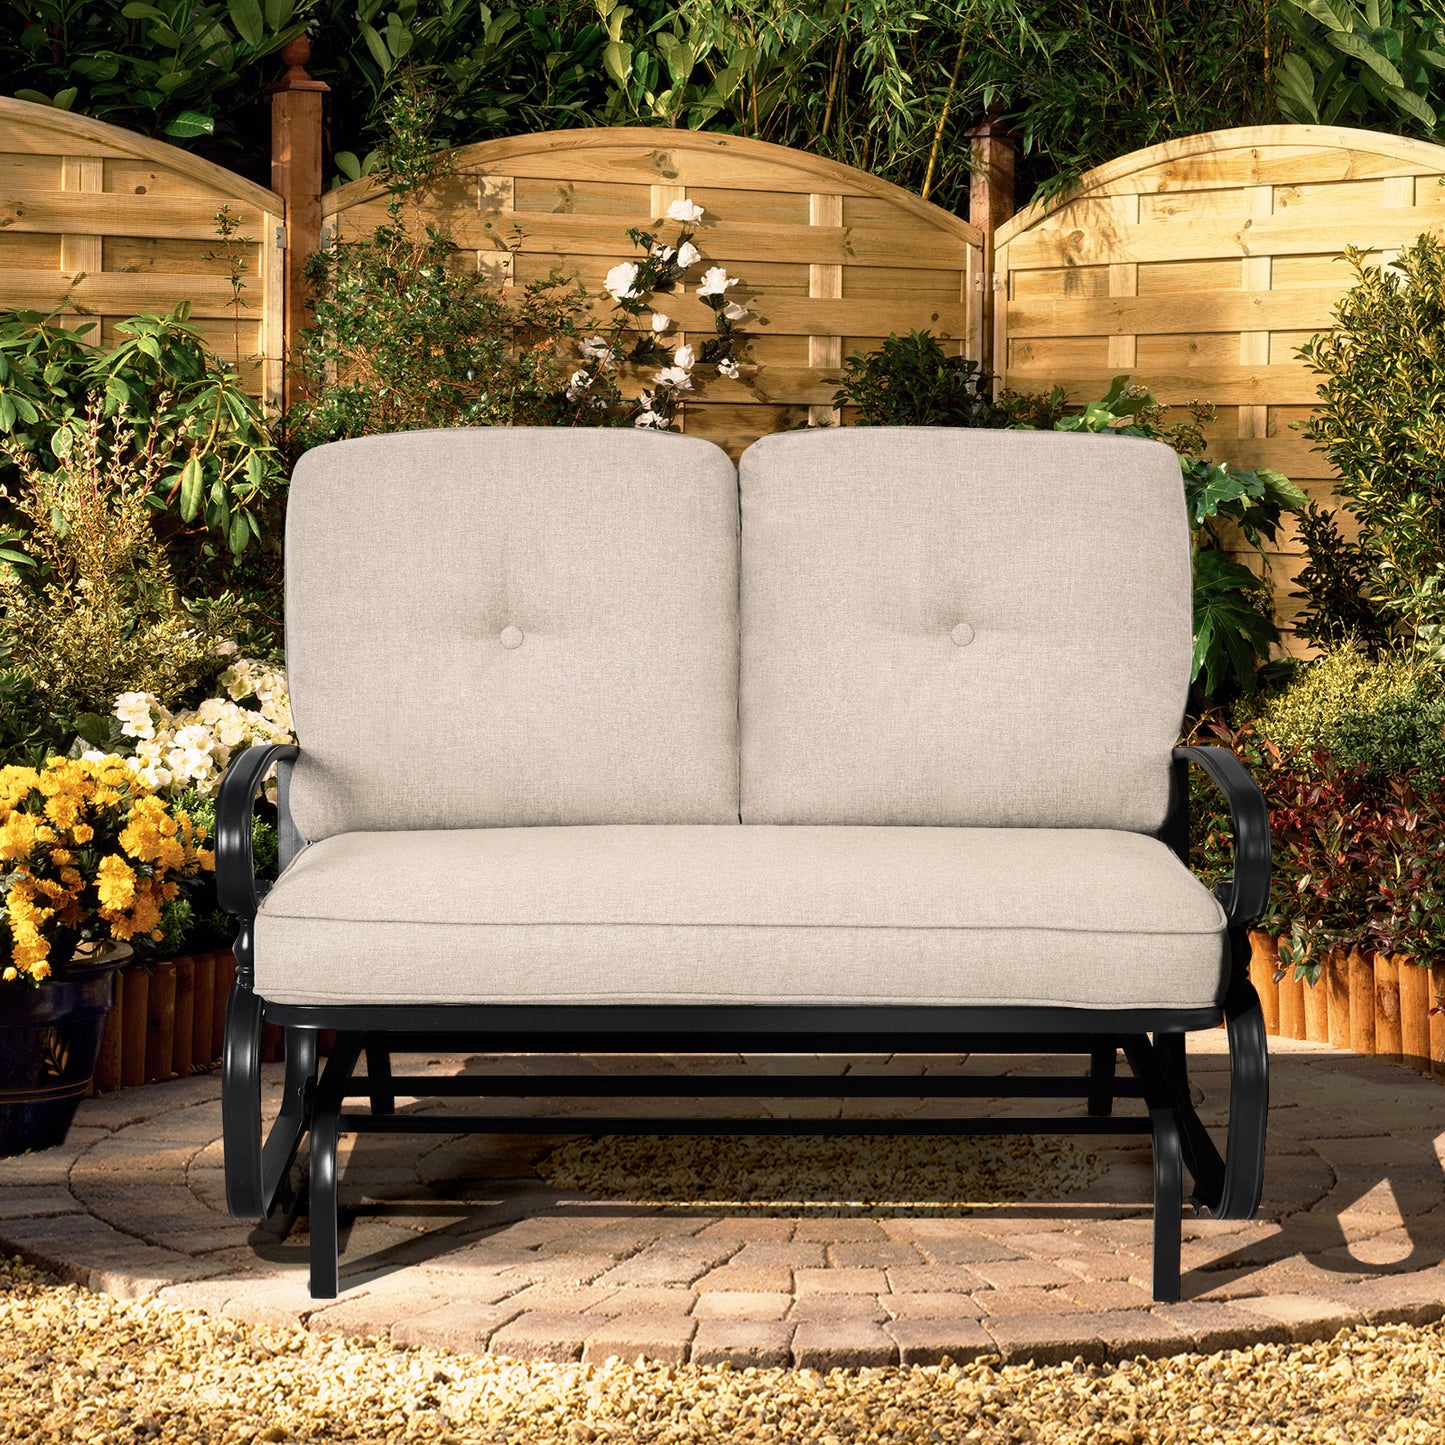 2 Seats Outdoor Swing Glider Chair with Comfortable Cushions-Beige